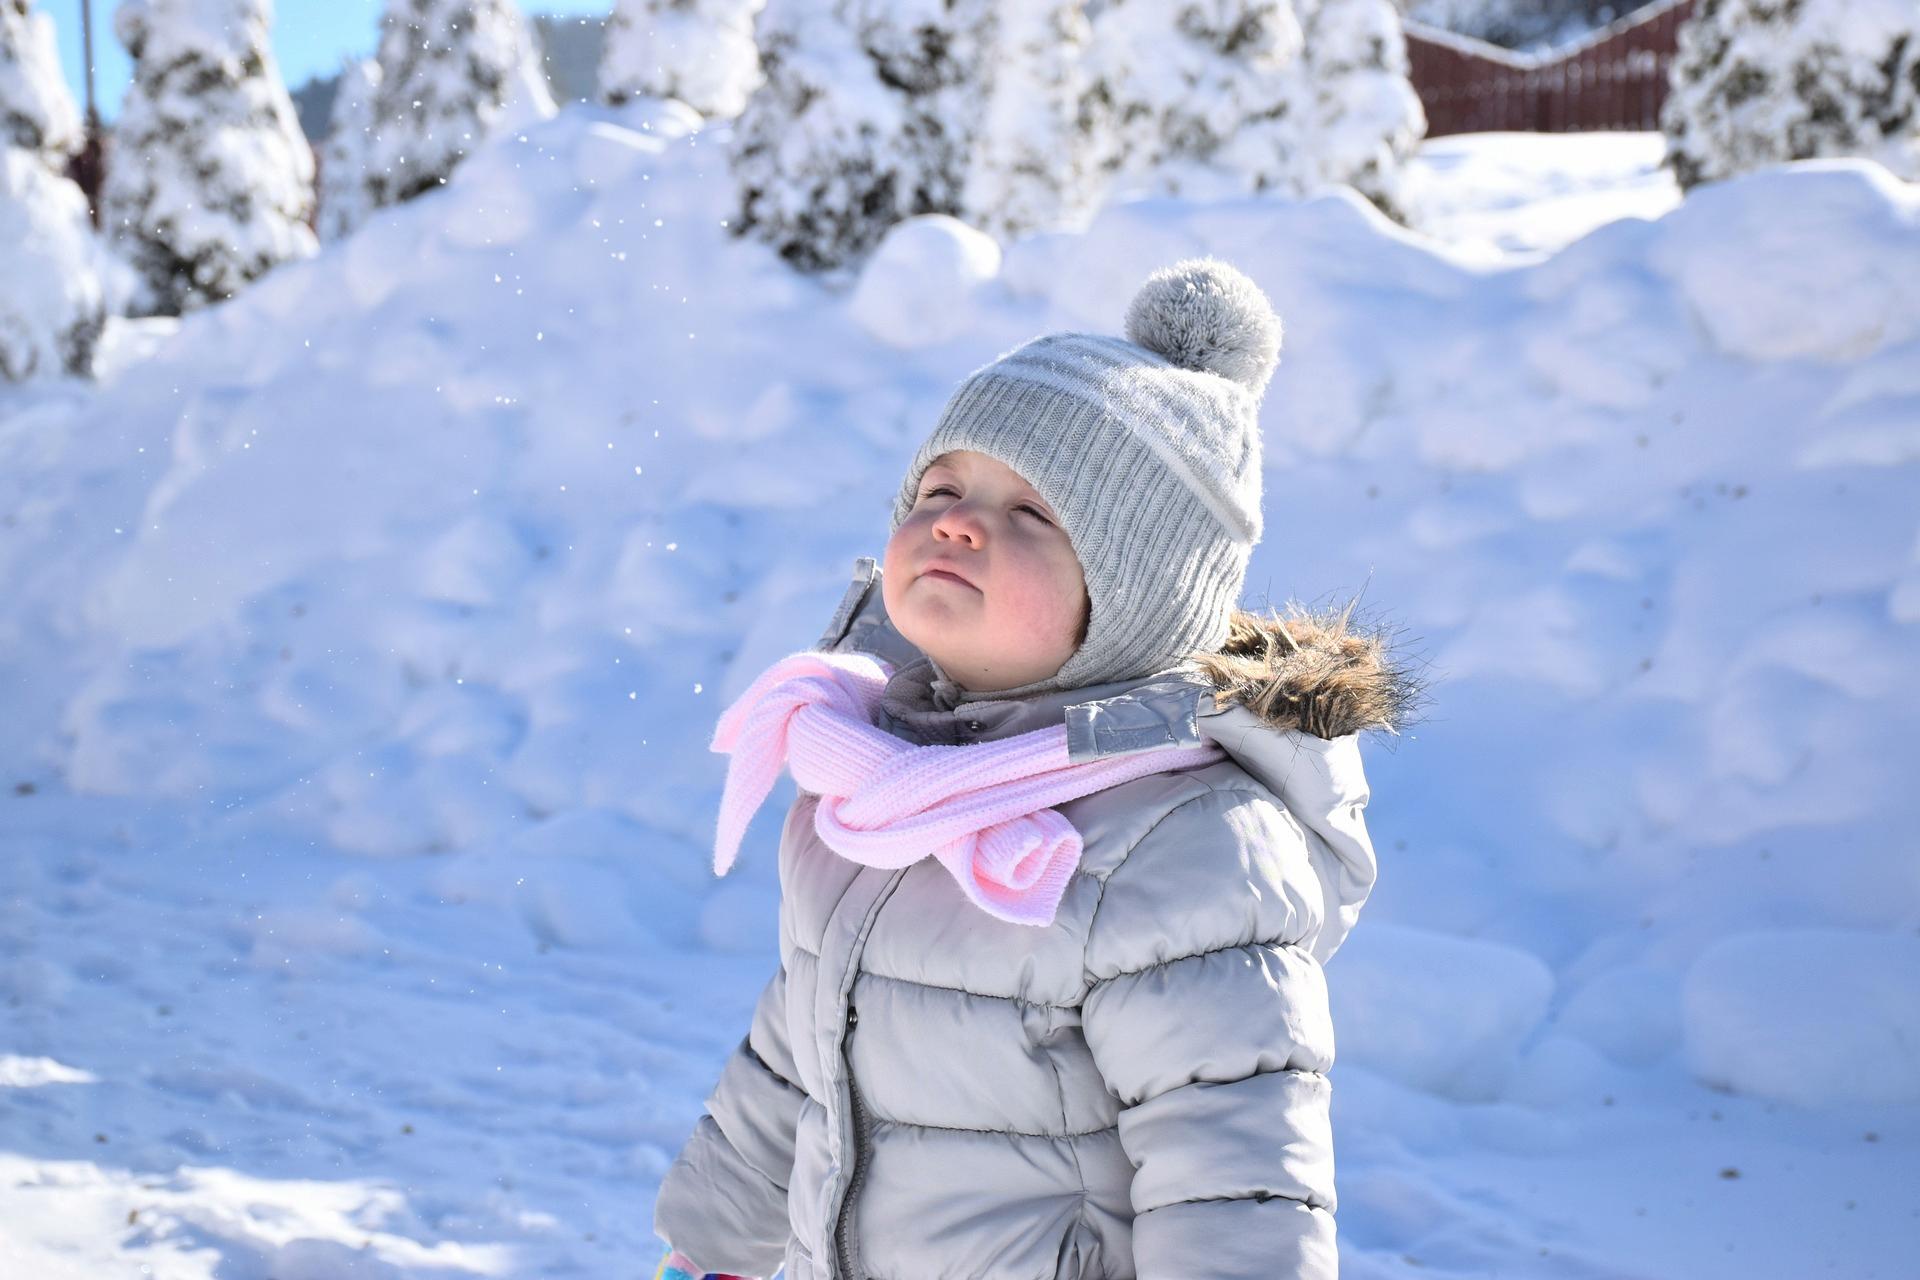 How To Buy Warm Outfits For Your Kids?